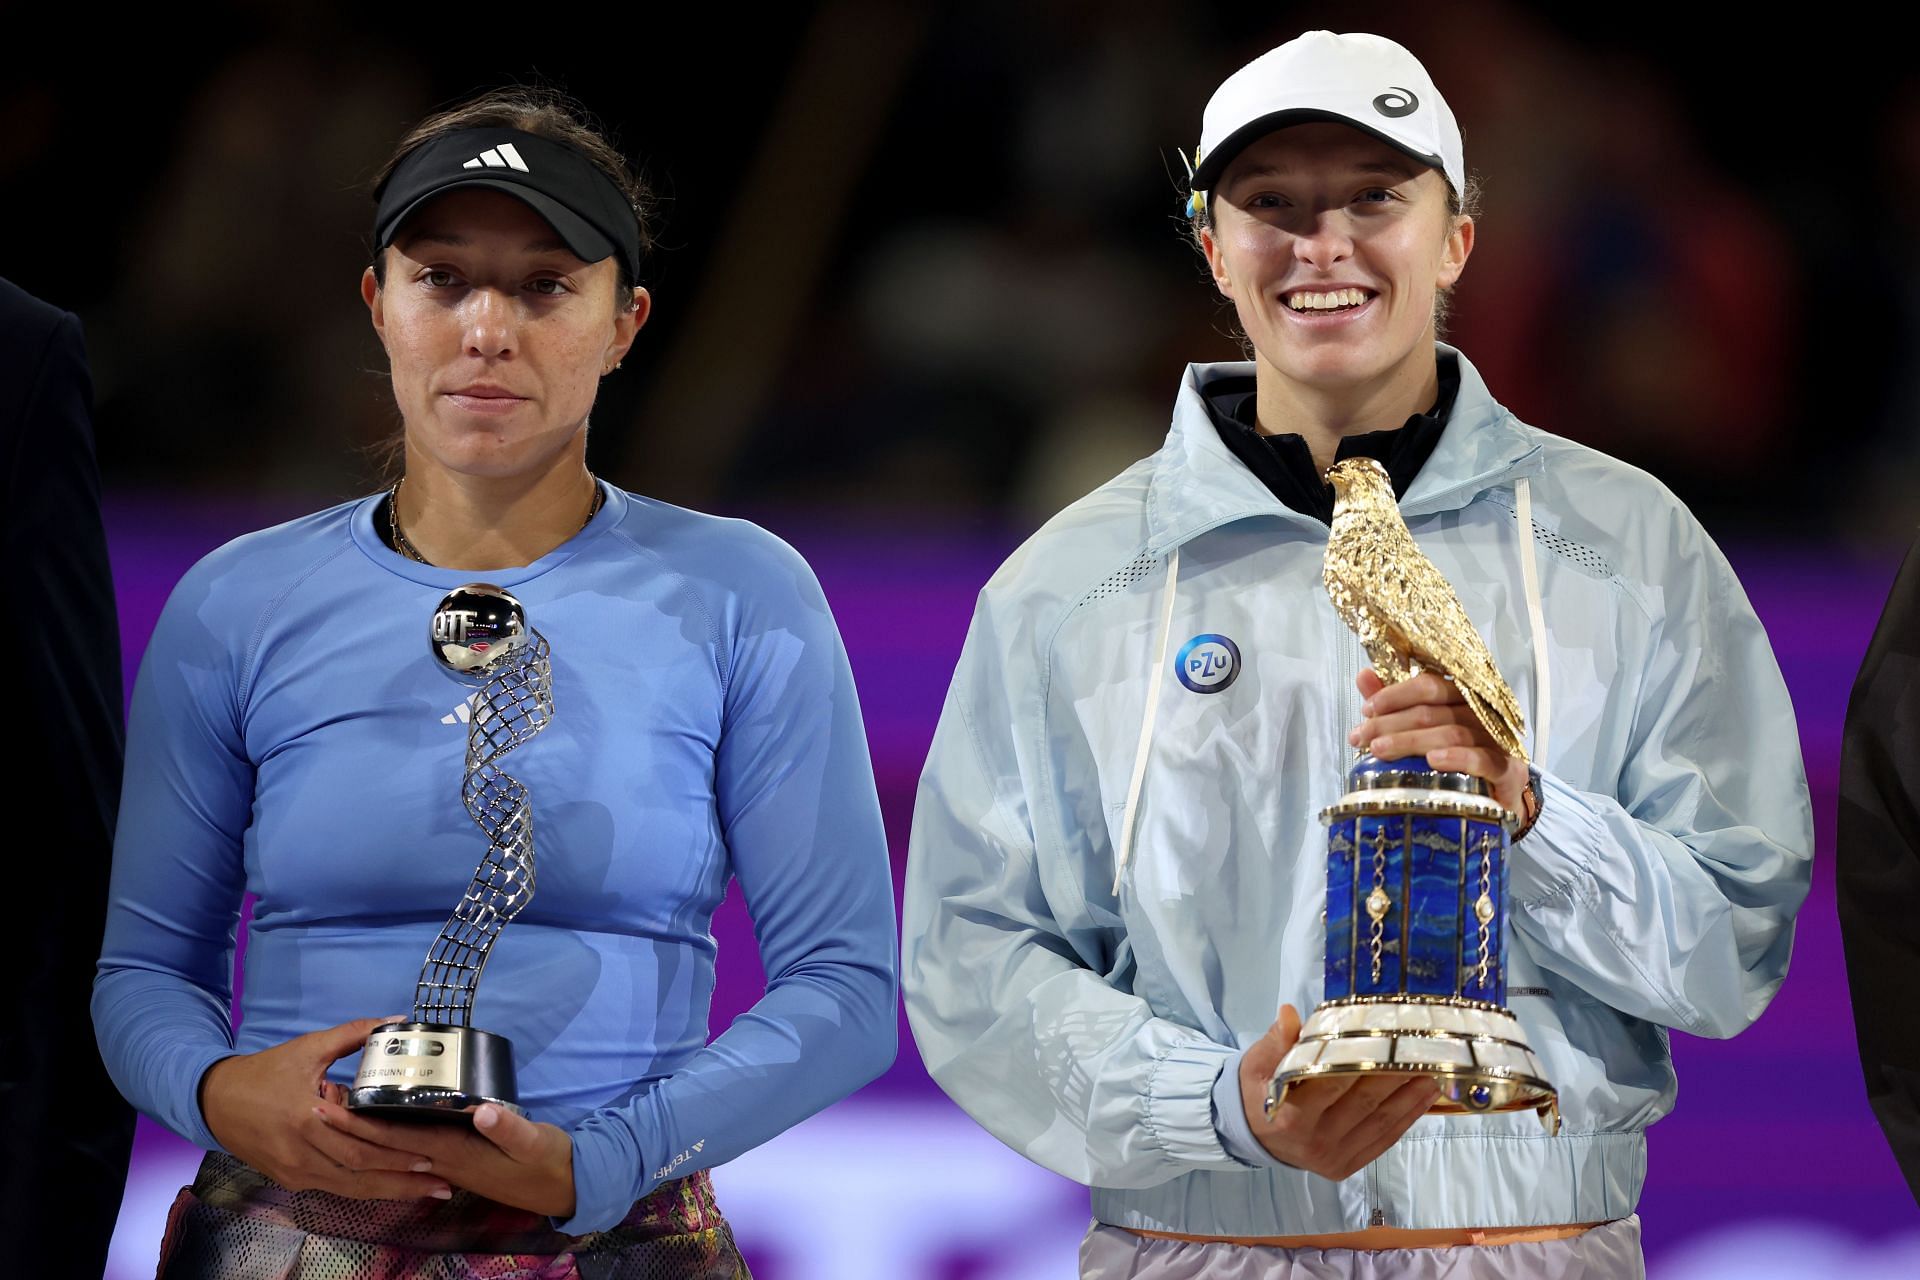 Iga Swiatek vs Jessica Pegula: Where to watch, TV schedule, live streaming details and more | WTA Finals, Final